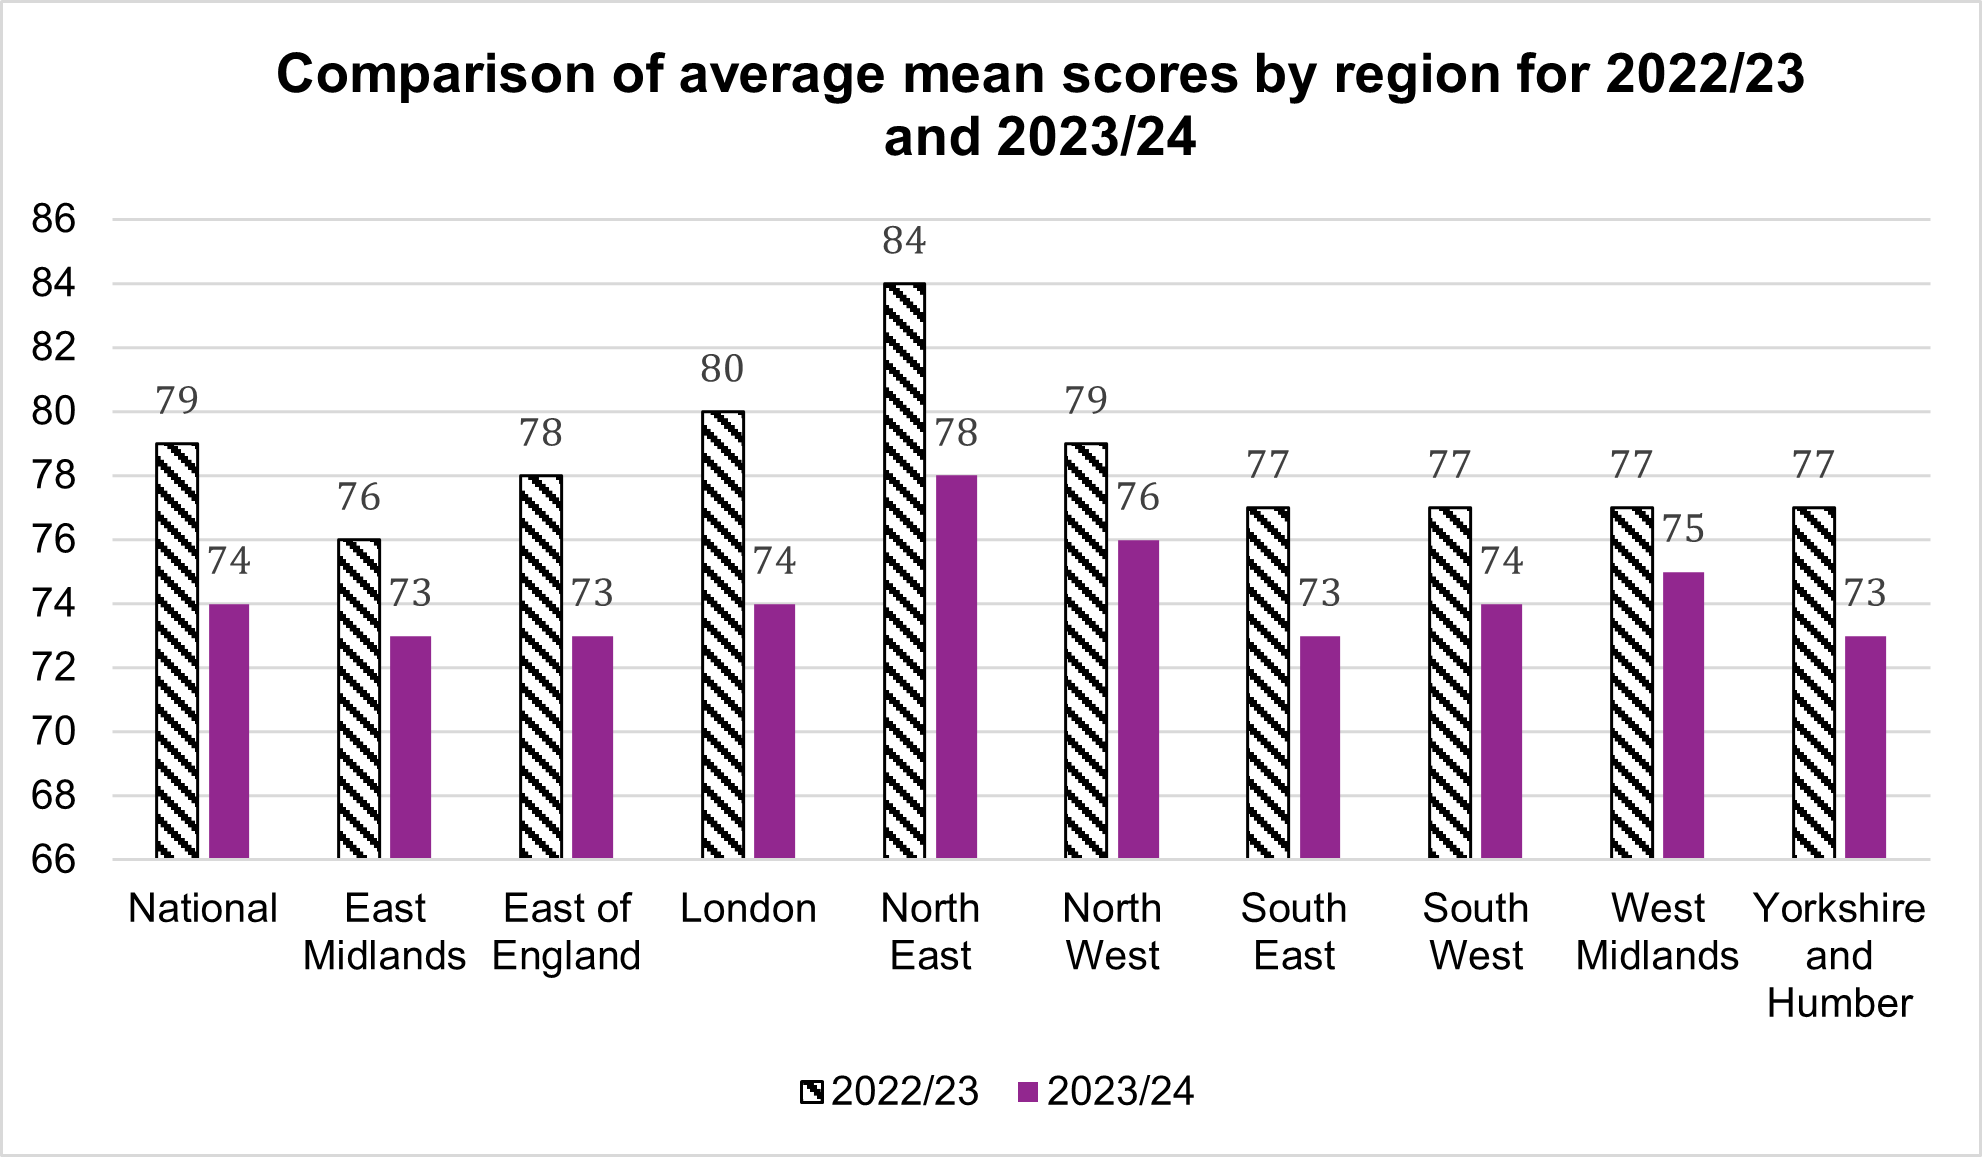 Comparison of average mean scores by region for 2022/23 and 2023/24